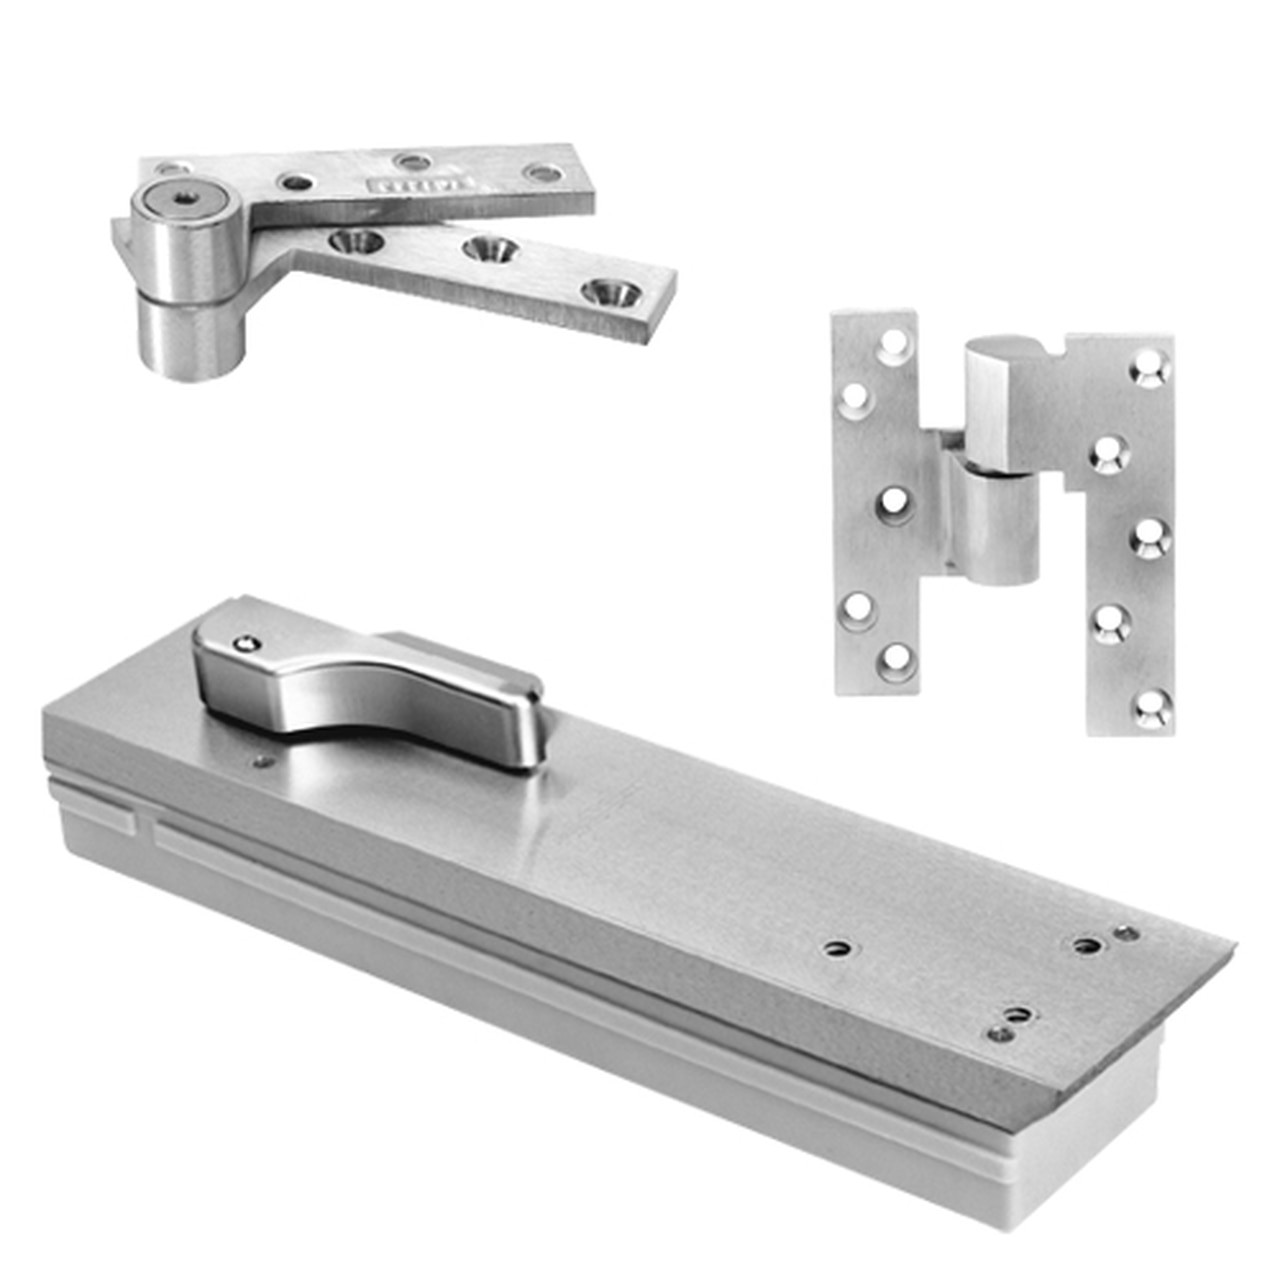 FQ5104NBC-LFP-LTP-RH-625 Rixson Q51 Series Fire Rated 3/4" Offset Hung Shallow Depth Floor Closers in Bright Chrome Finish